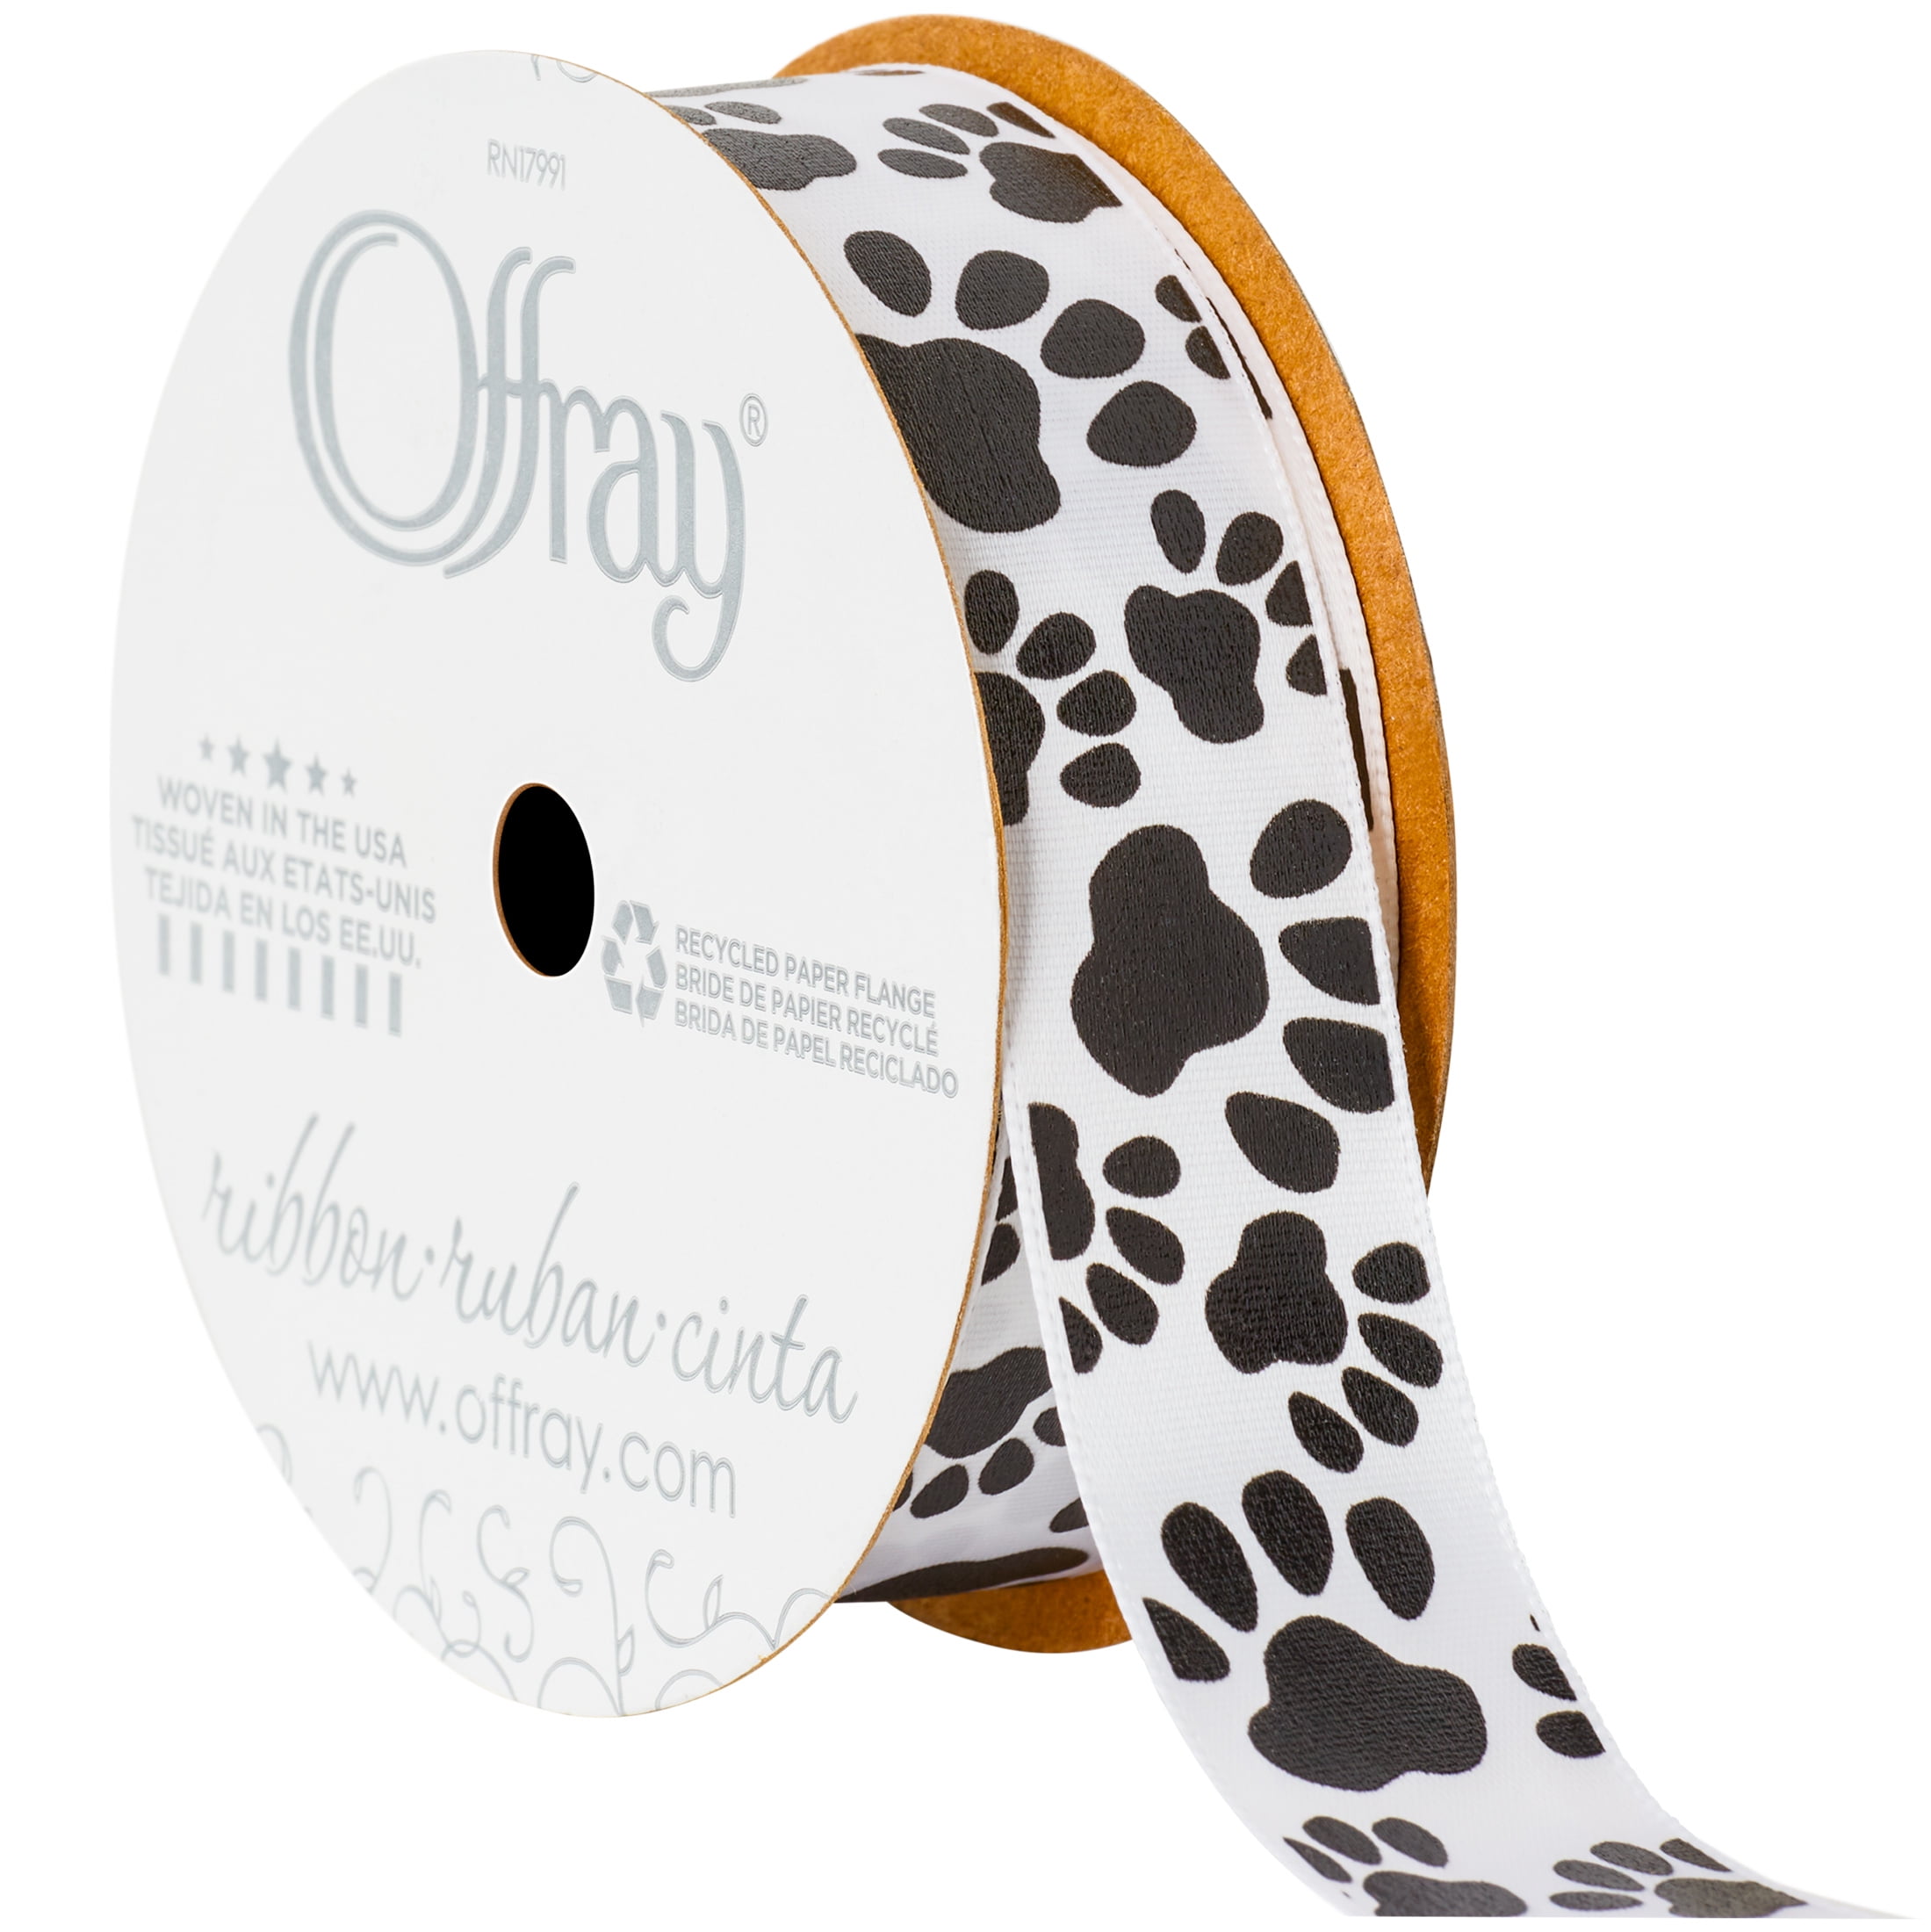 Offray Ribbon, White 7/8 inch Black Paw Print Satin Ribbon for Sewing ...